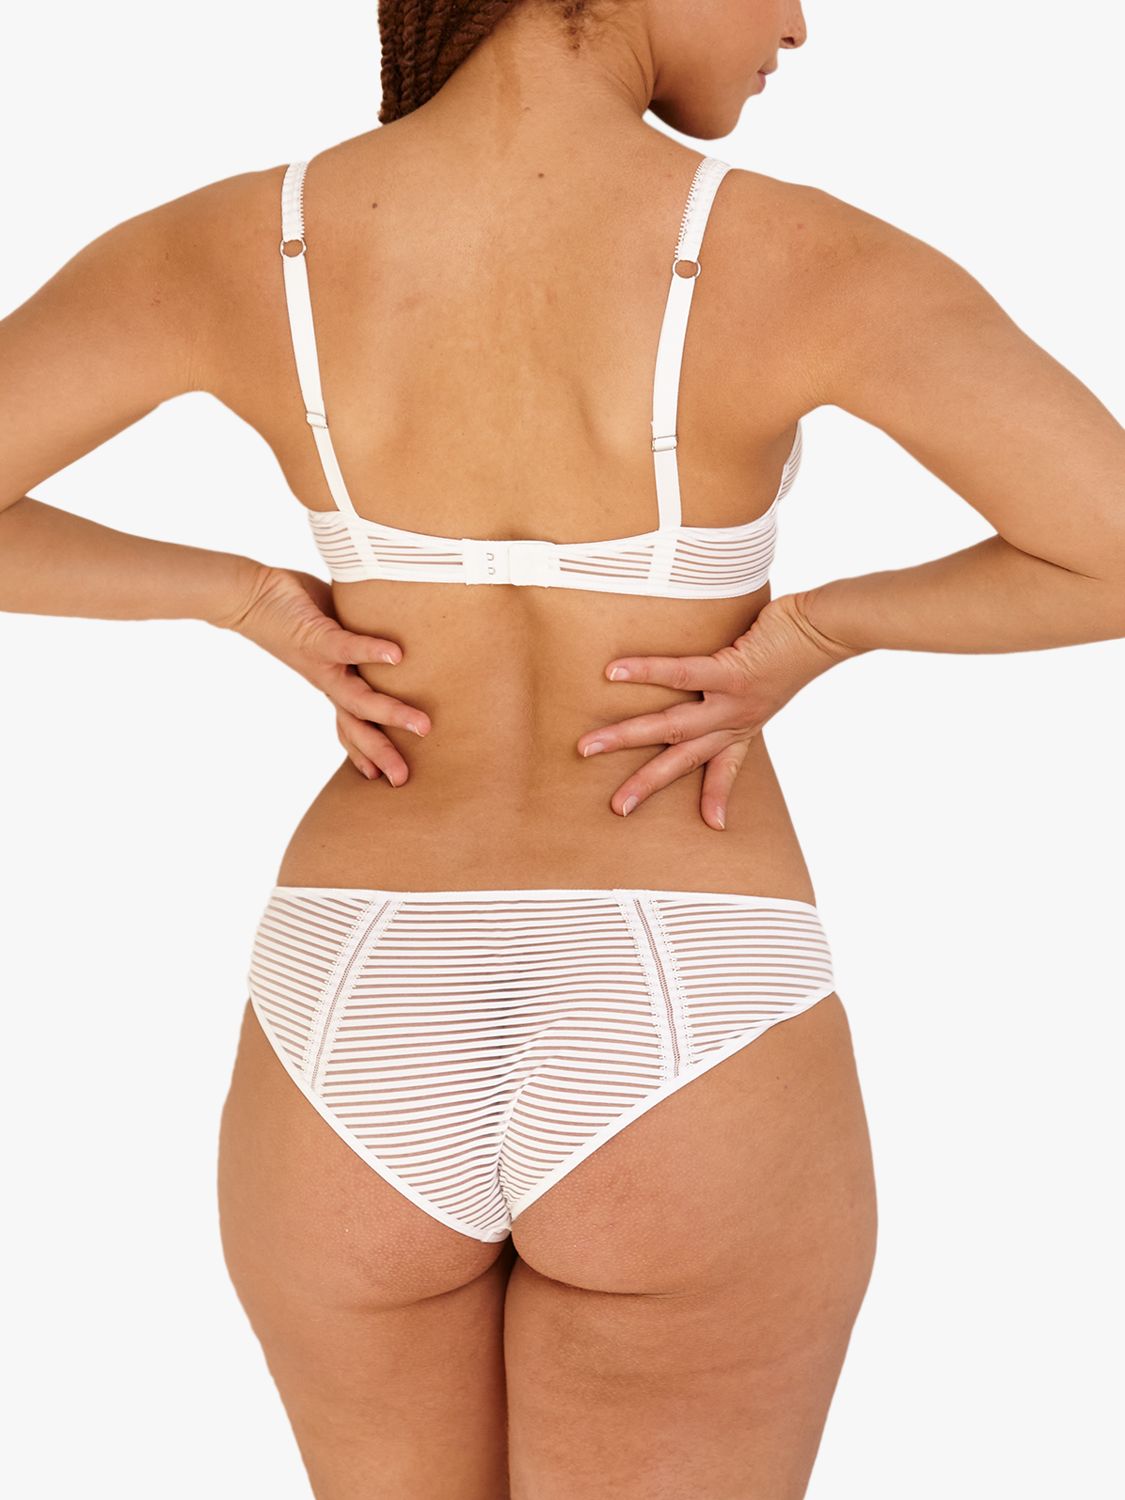 Buying Lingerie For Your Wife, Tips & Advice – Beija London